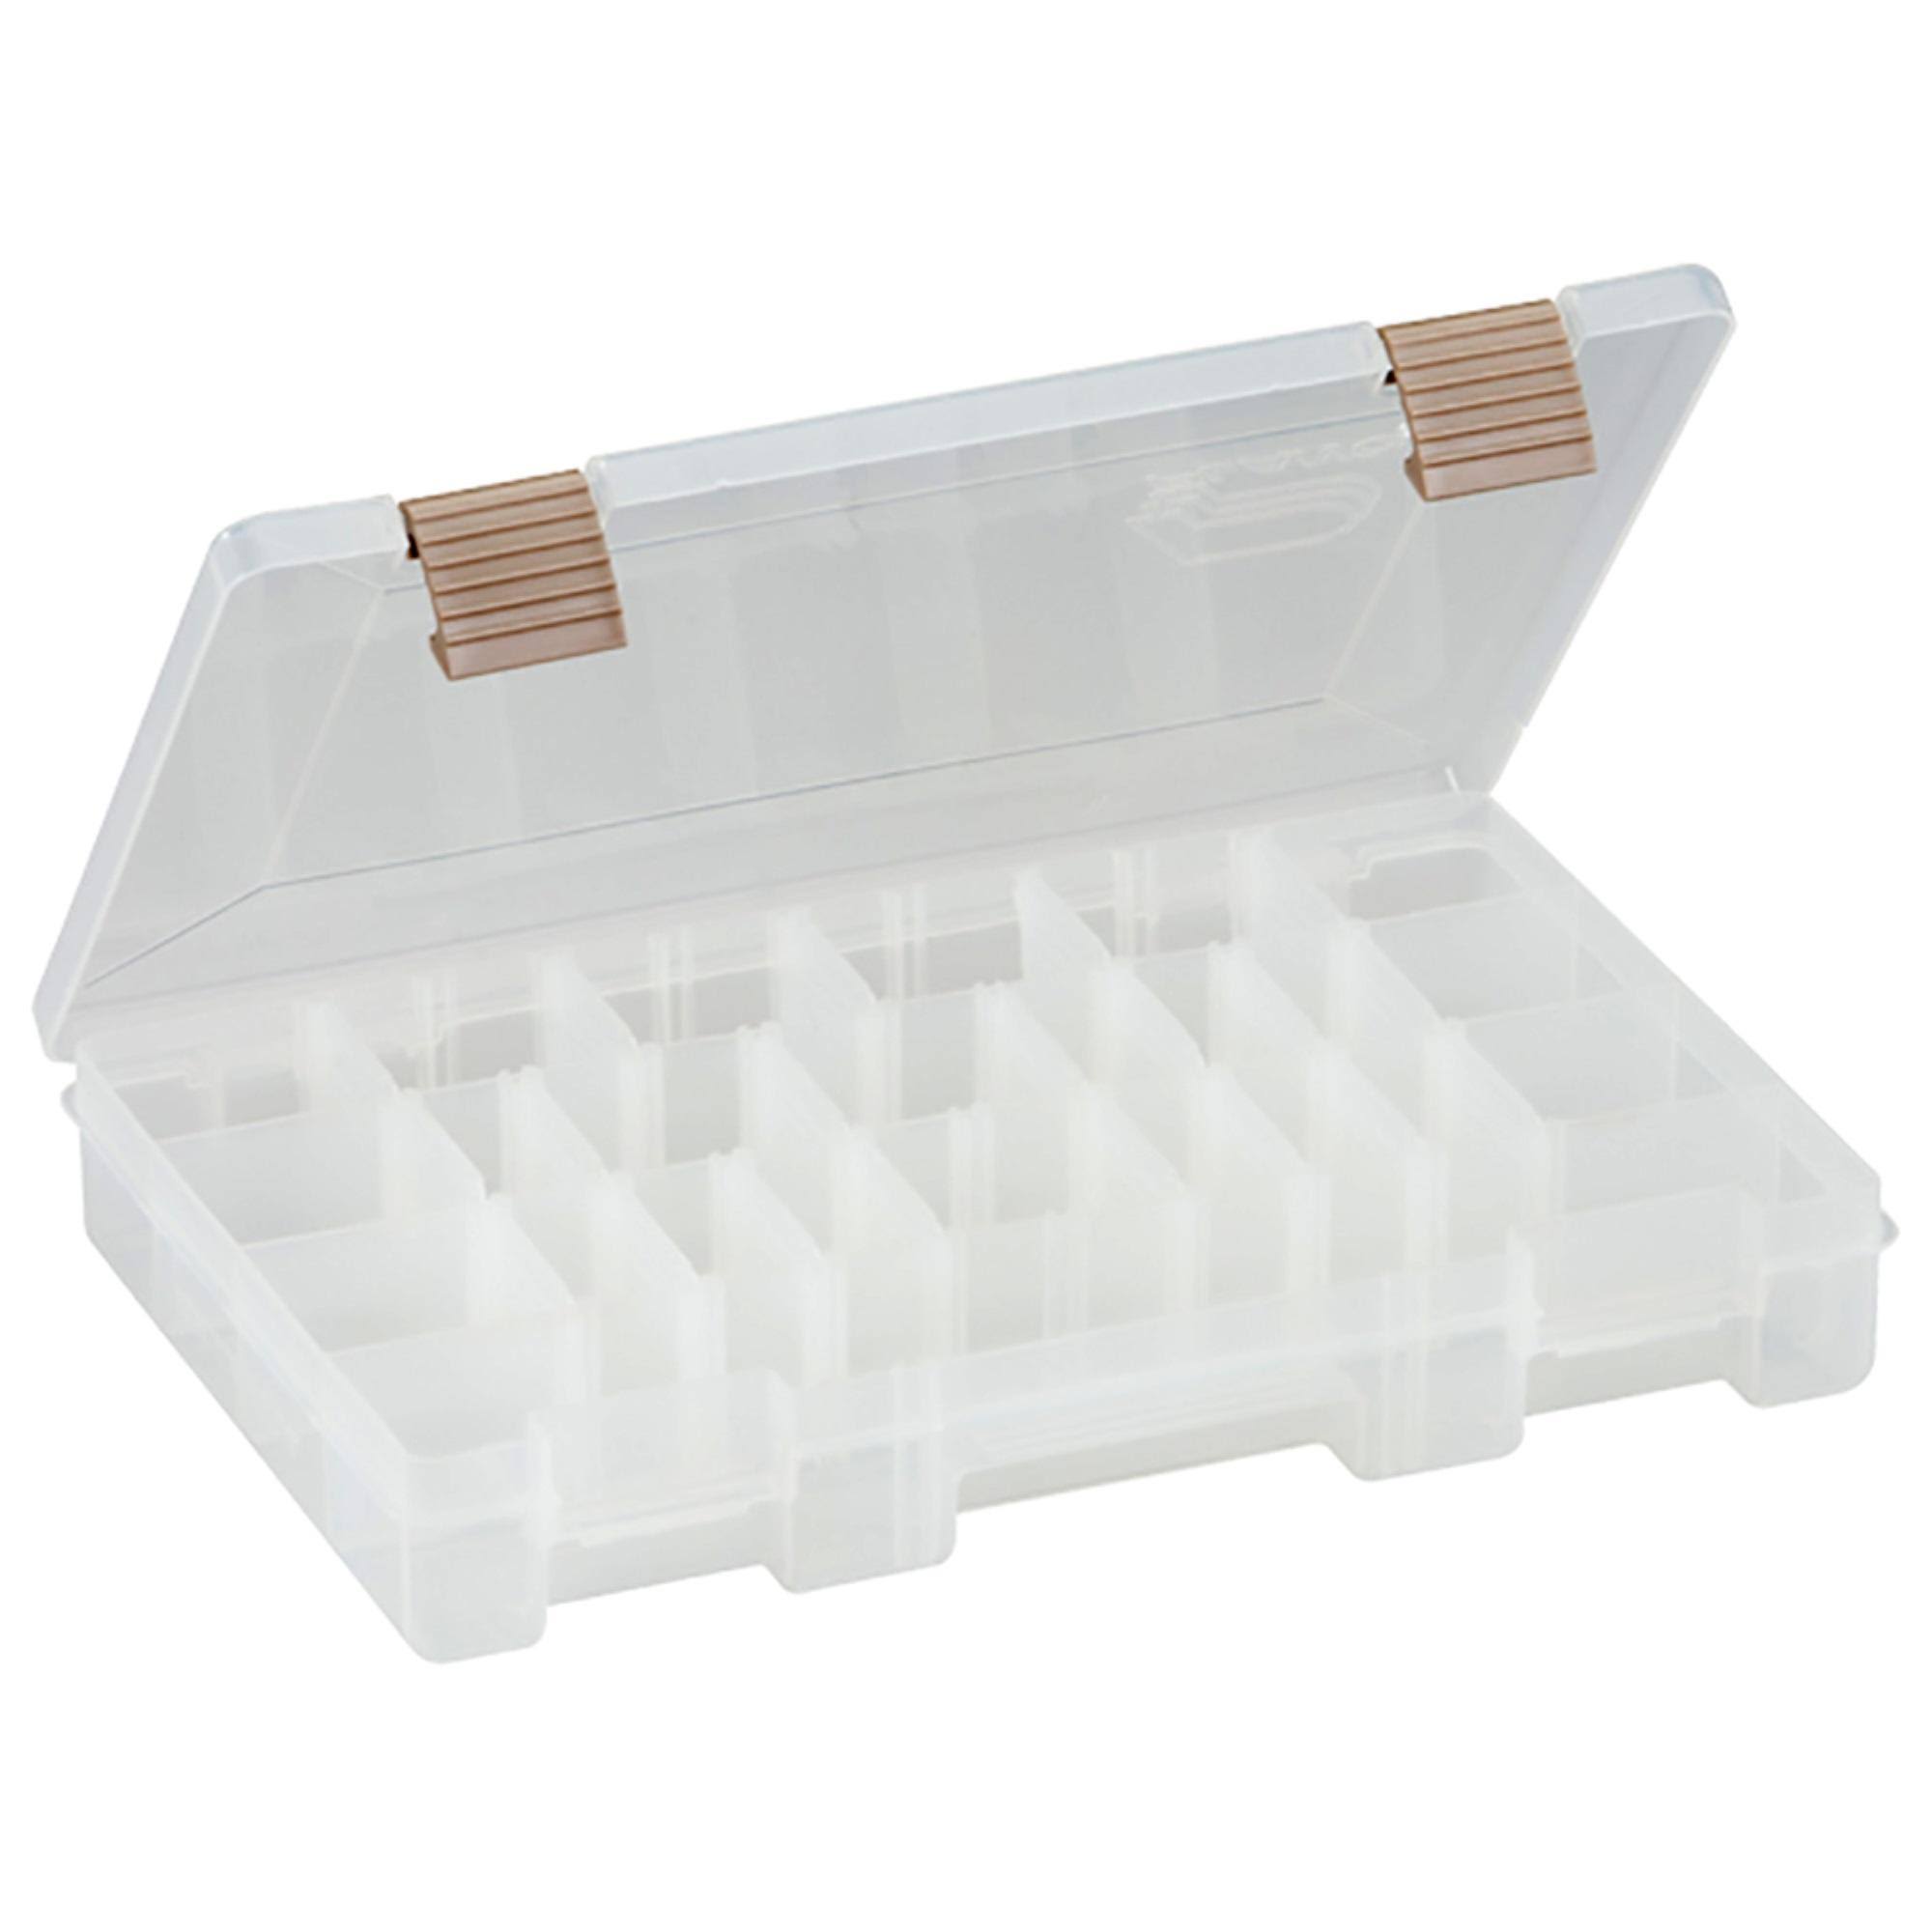 Plano 23620-01 Stowaway - Clear, with Adjustable Dividers